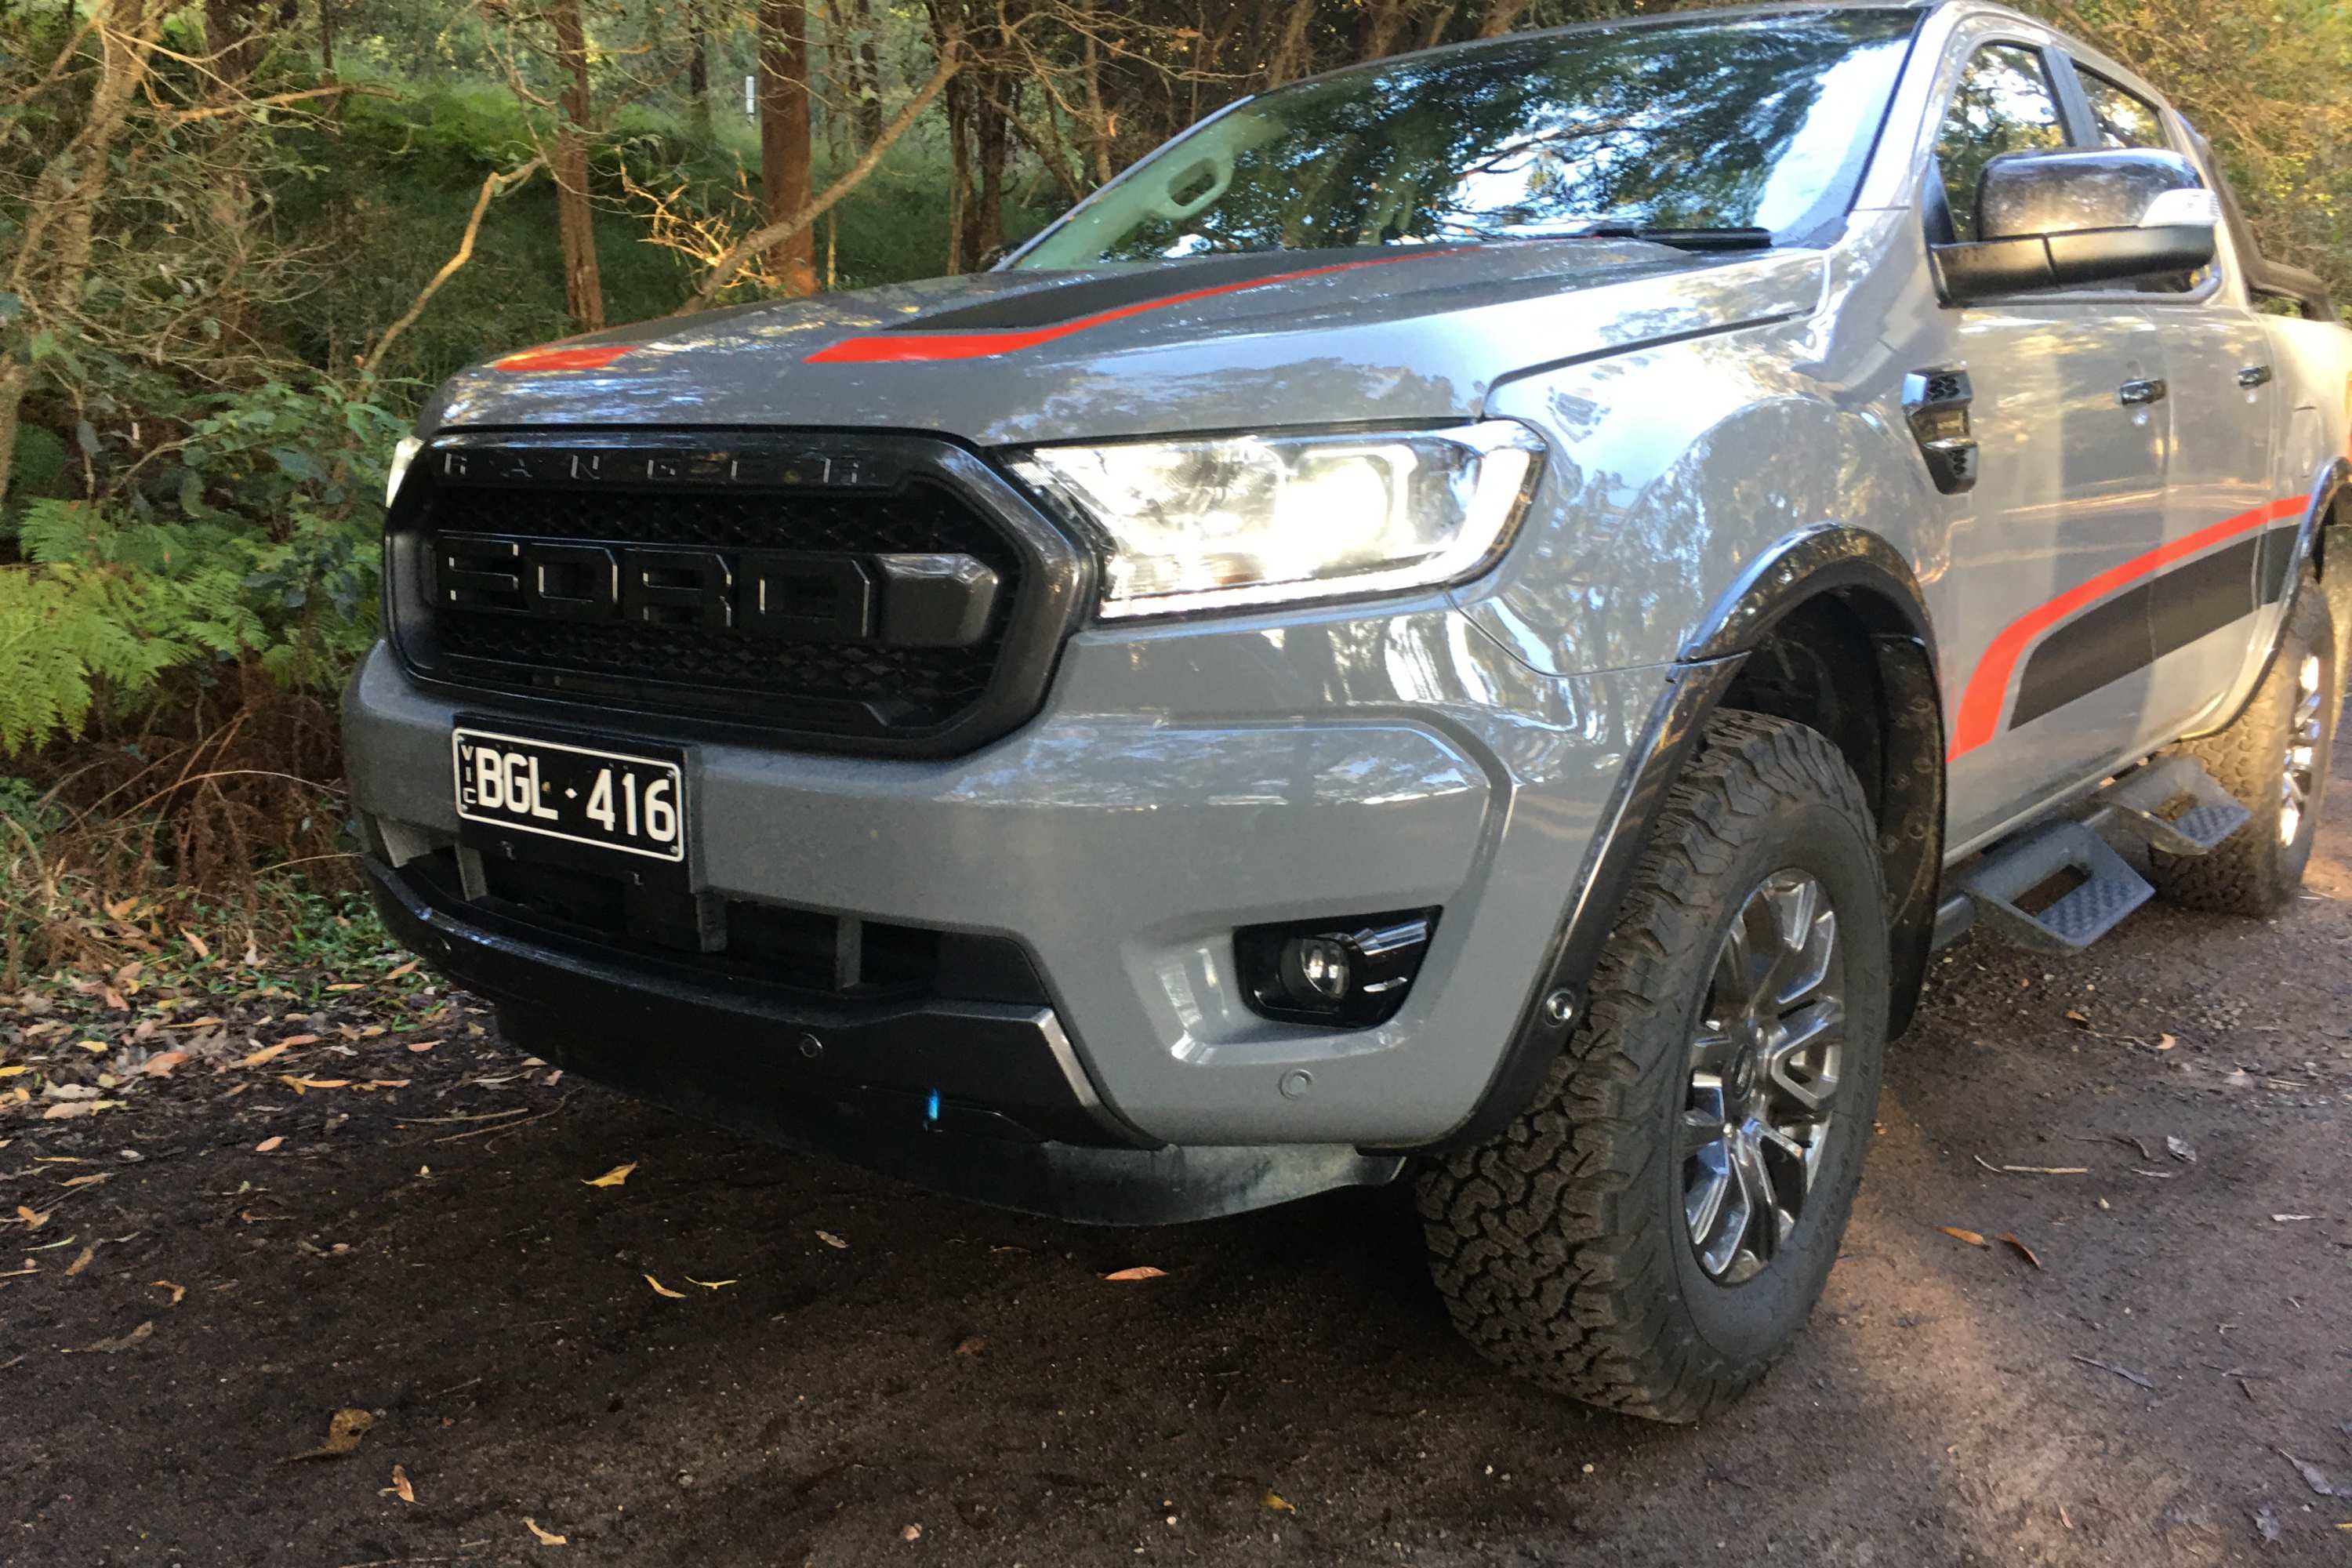 2021 Ford Ranger FX4 4WD Dual Cab Ute front qtr